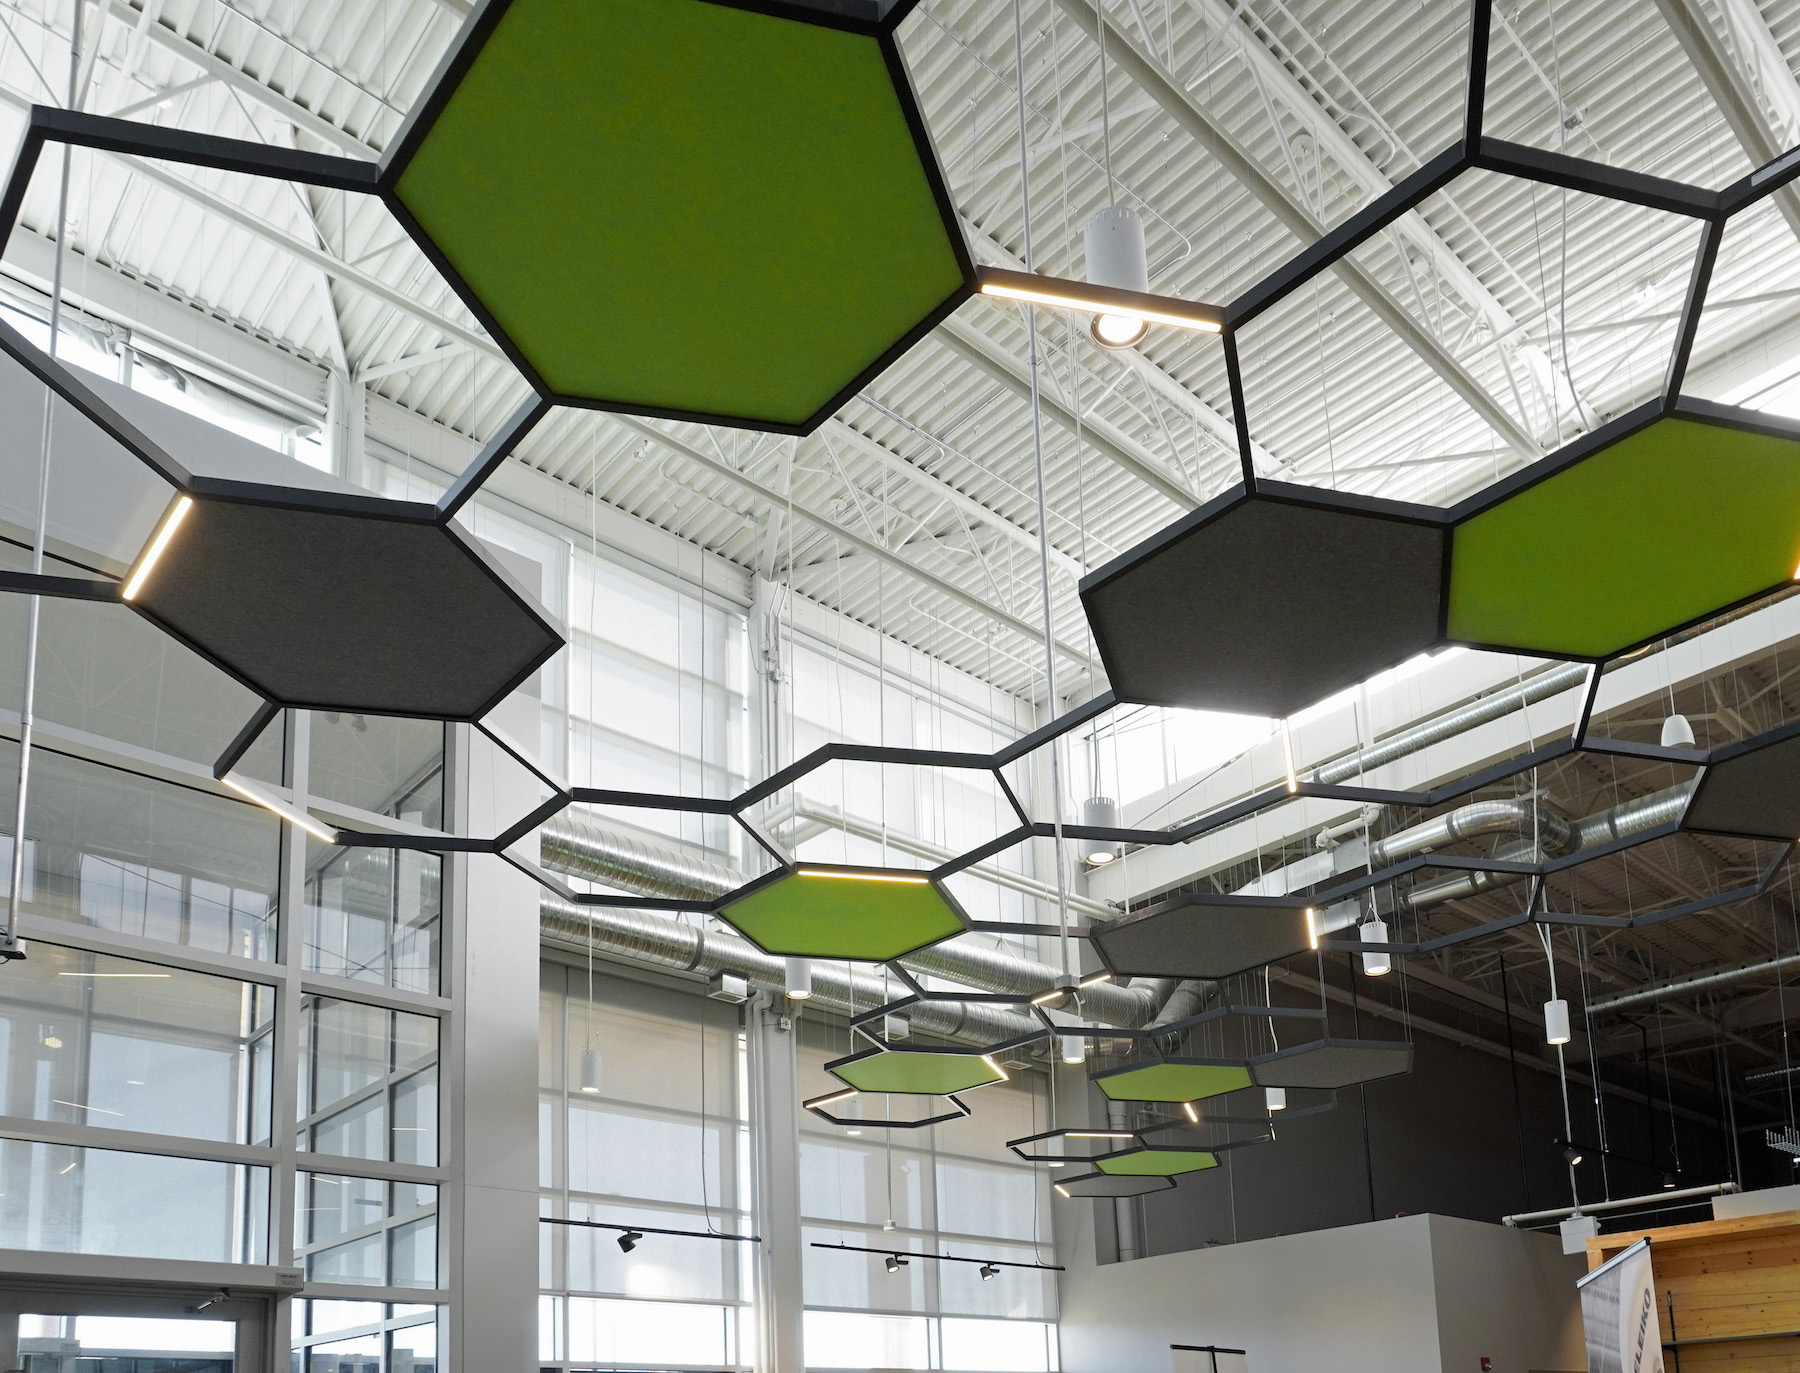 Axis Lighting structure adds 19 acoustical panels.